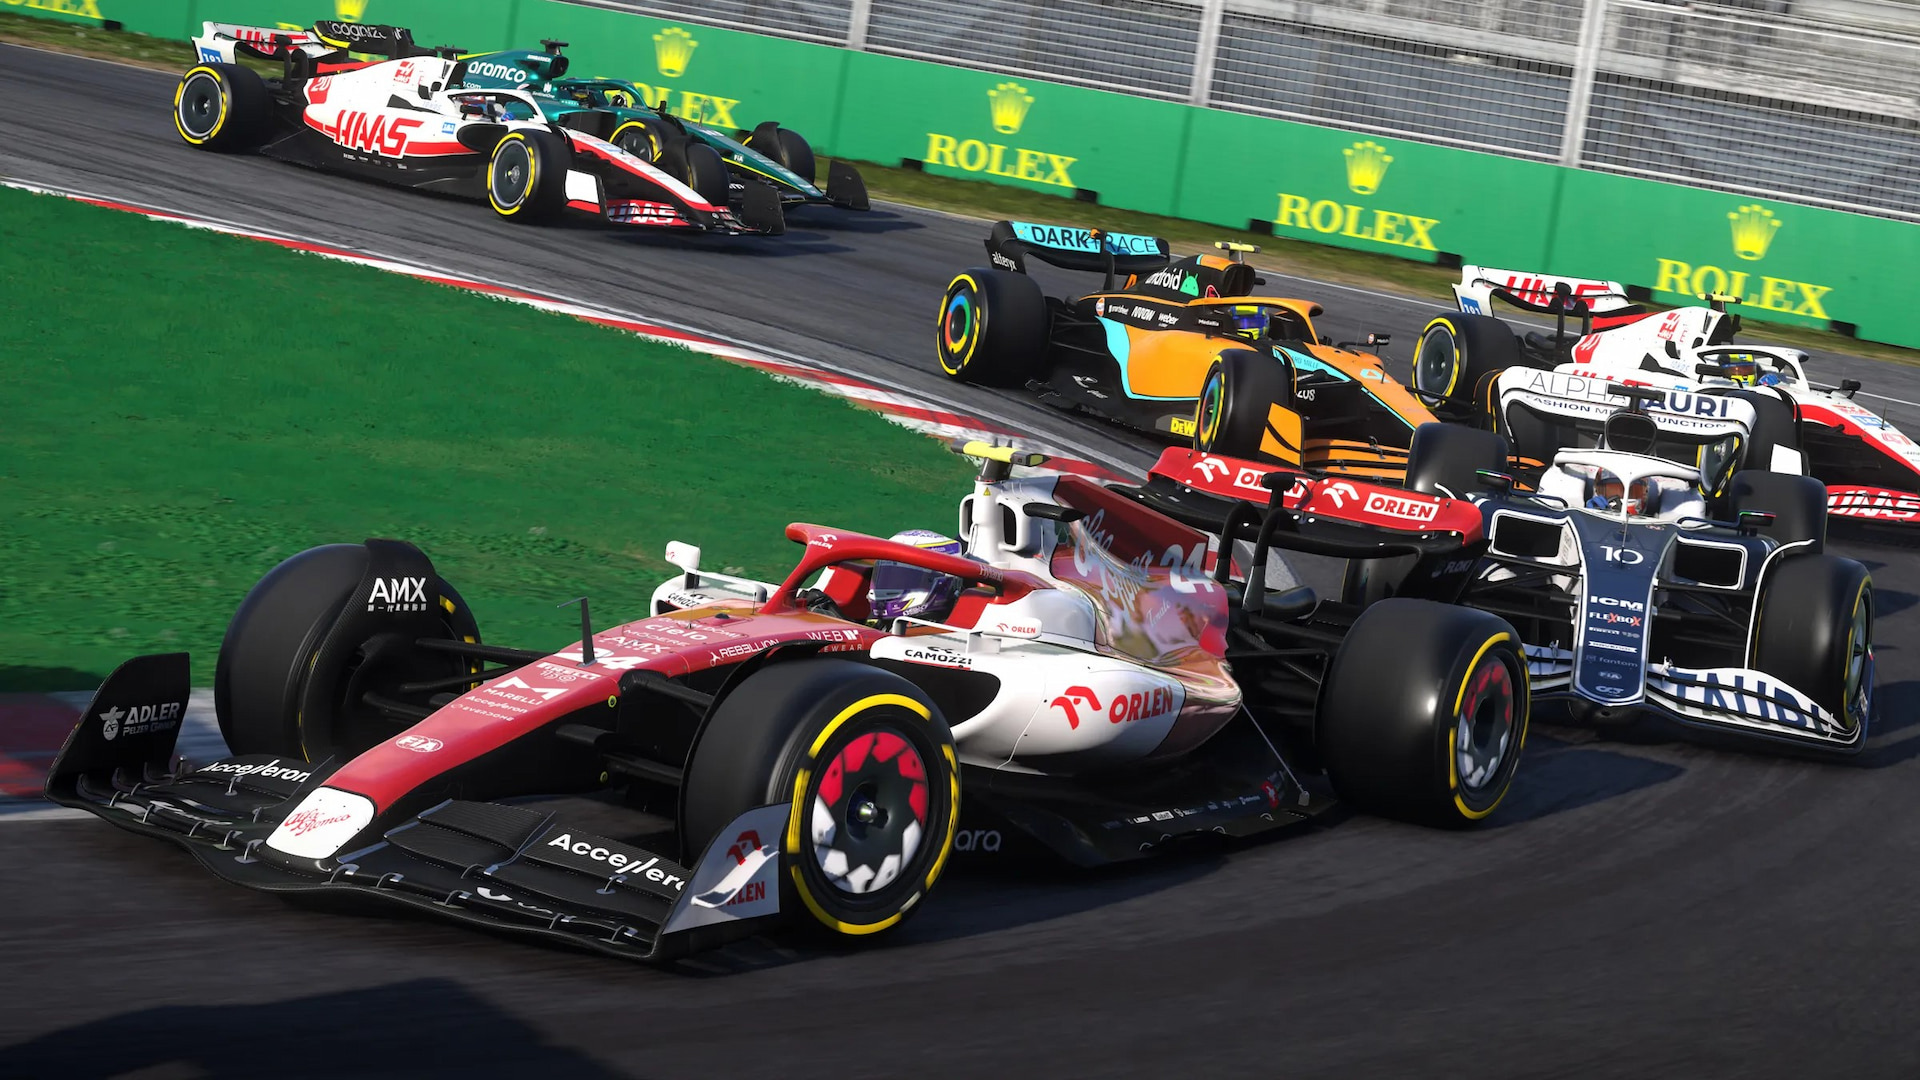 WHAT WILL THE F1 23 GAME LOOK LIKE? - NEW STORY MODE, MY TEAM, F1 WORLD? 